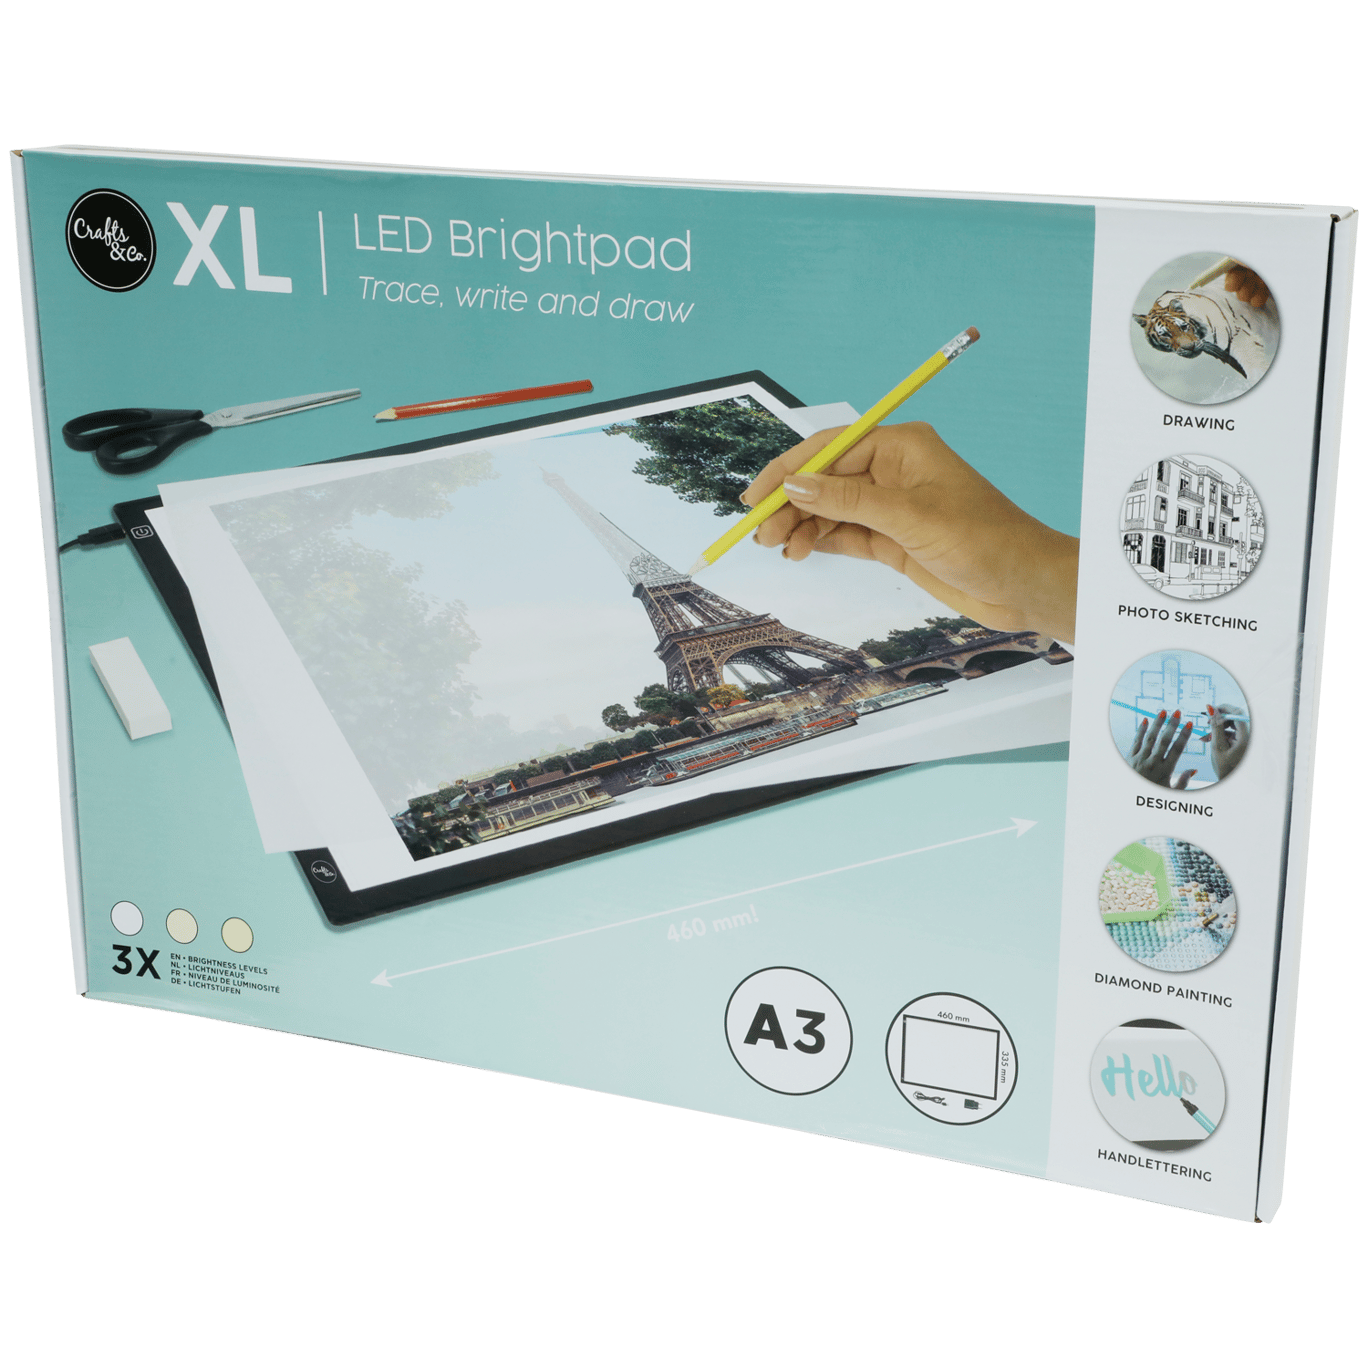 Tablette lumineuse LED XL Crafts & Co